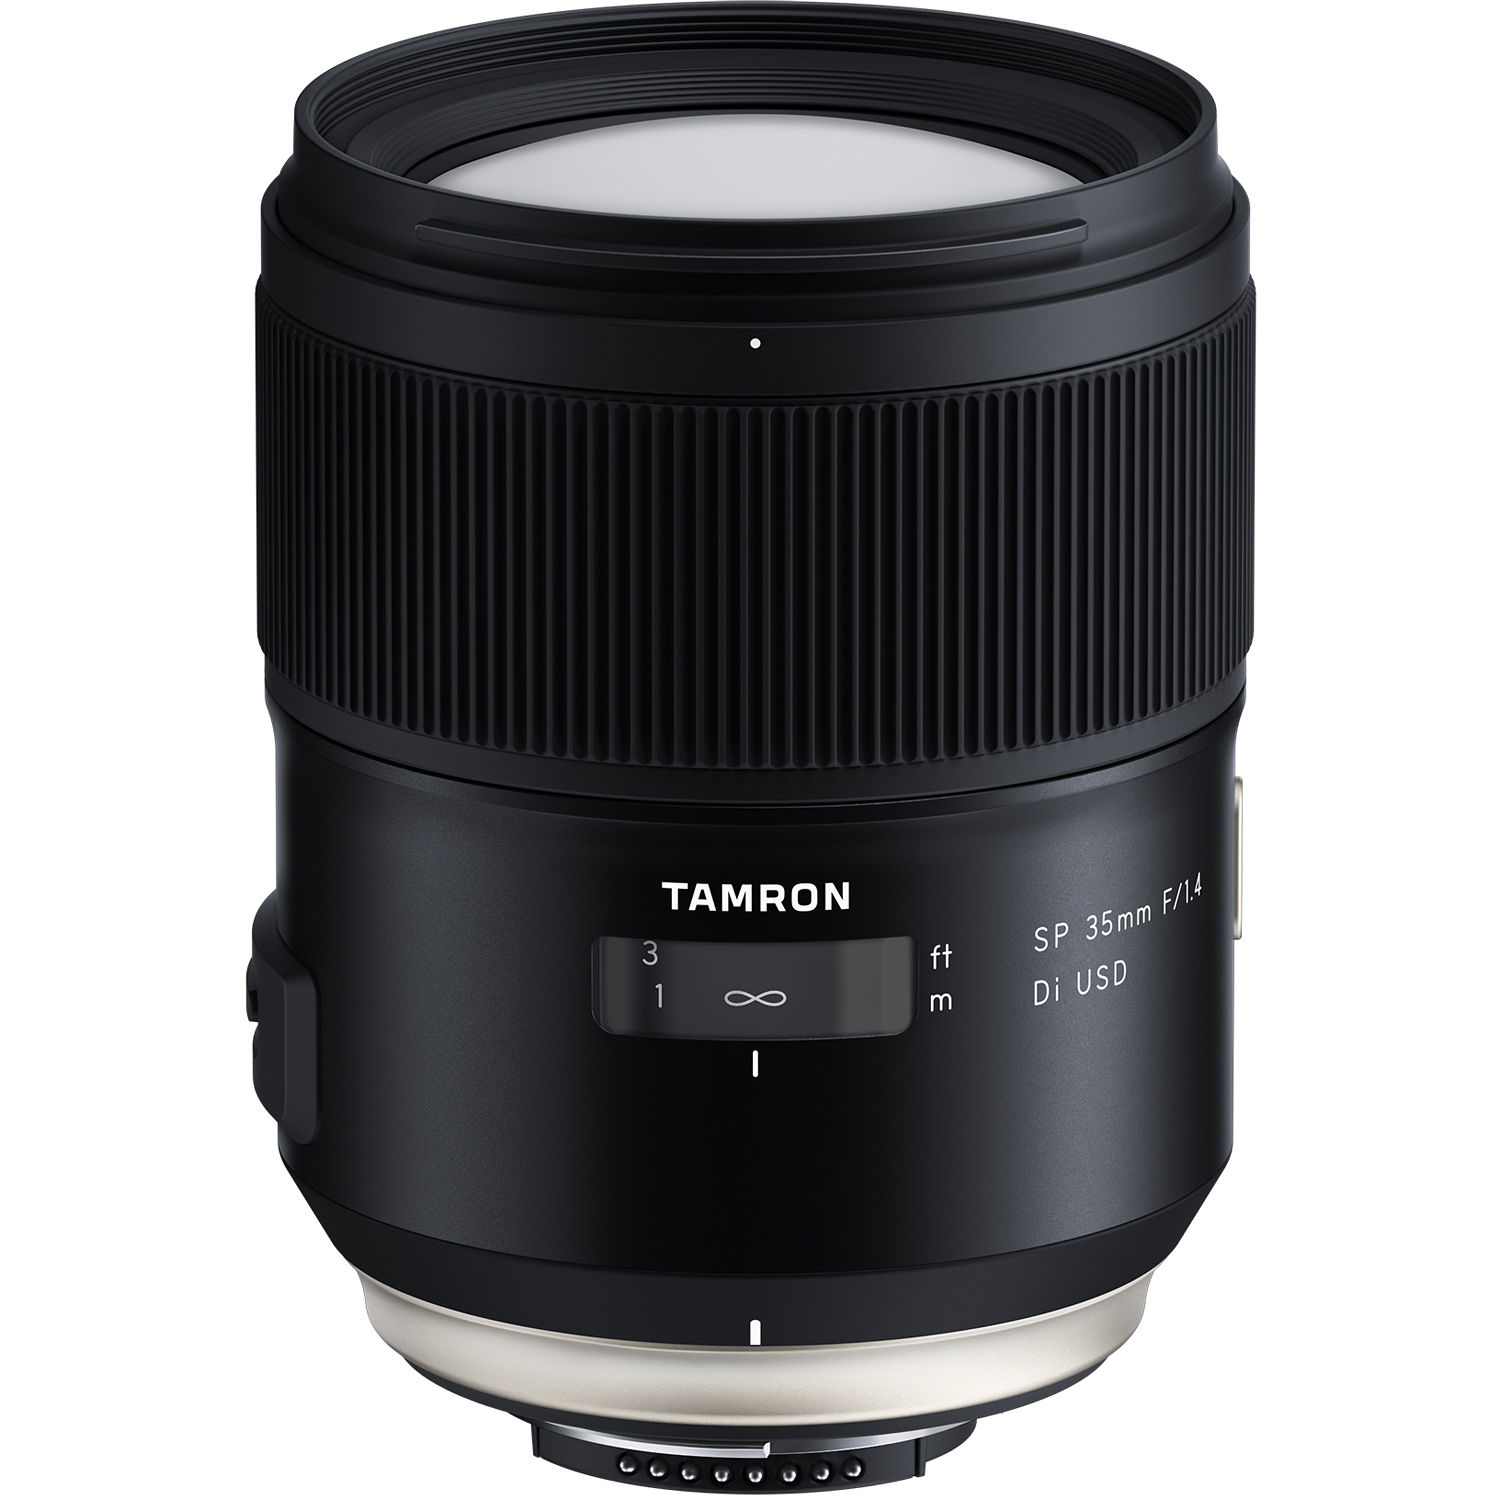 TThumbnail image for Tamron SP 35mm f/1.4 Di USD